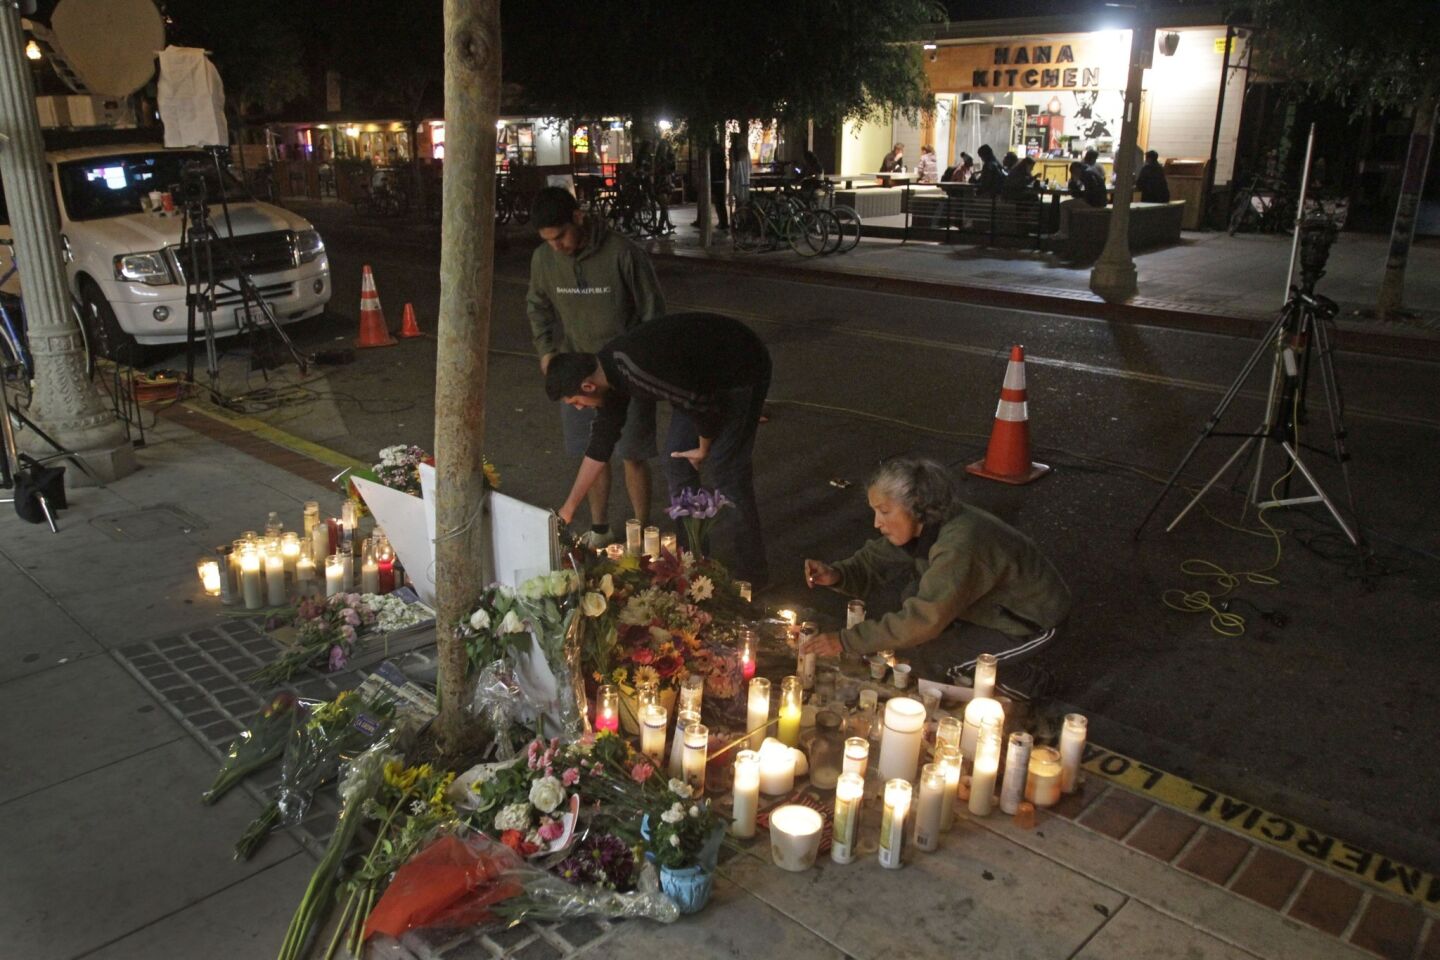 A candlelight vigil was held on Pardall Road near the scene of one of the fatal shootings in Isla Vista on Friday night.